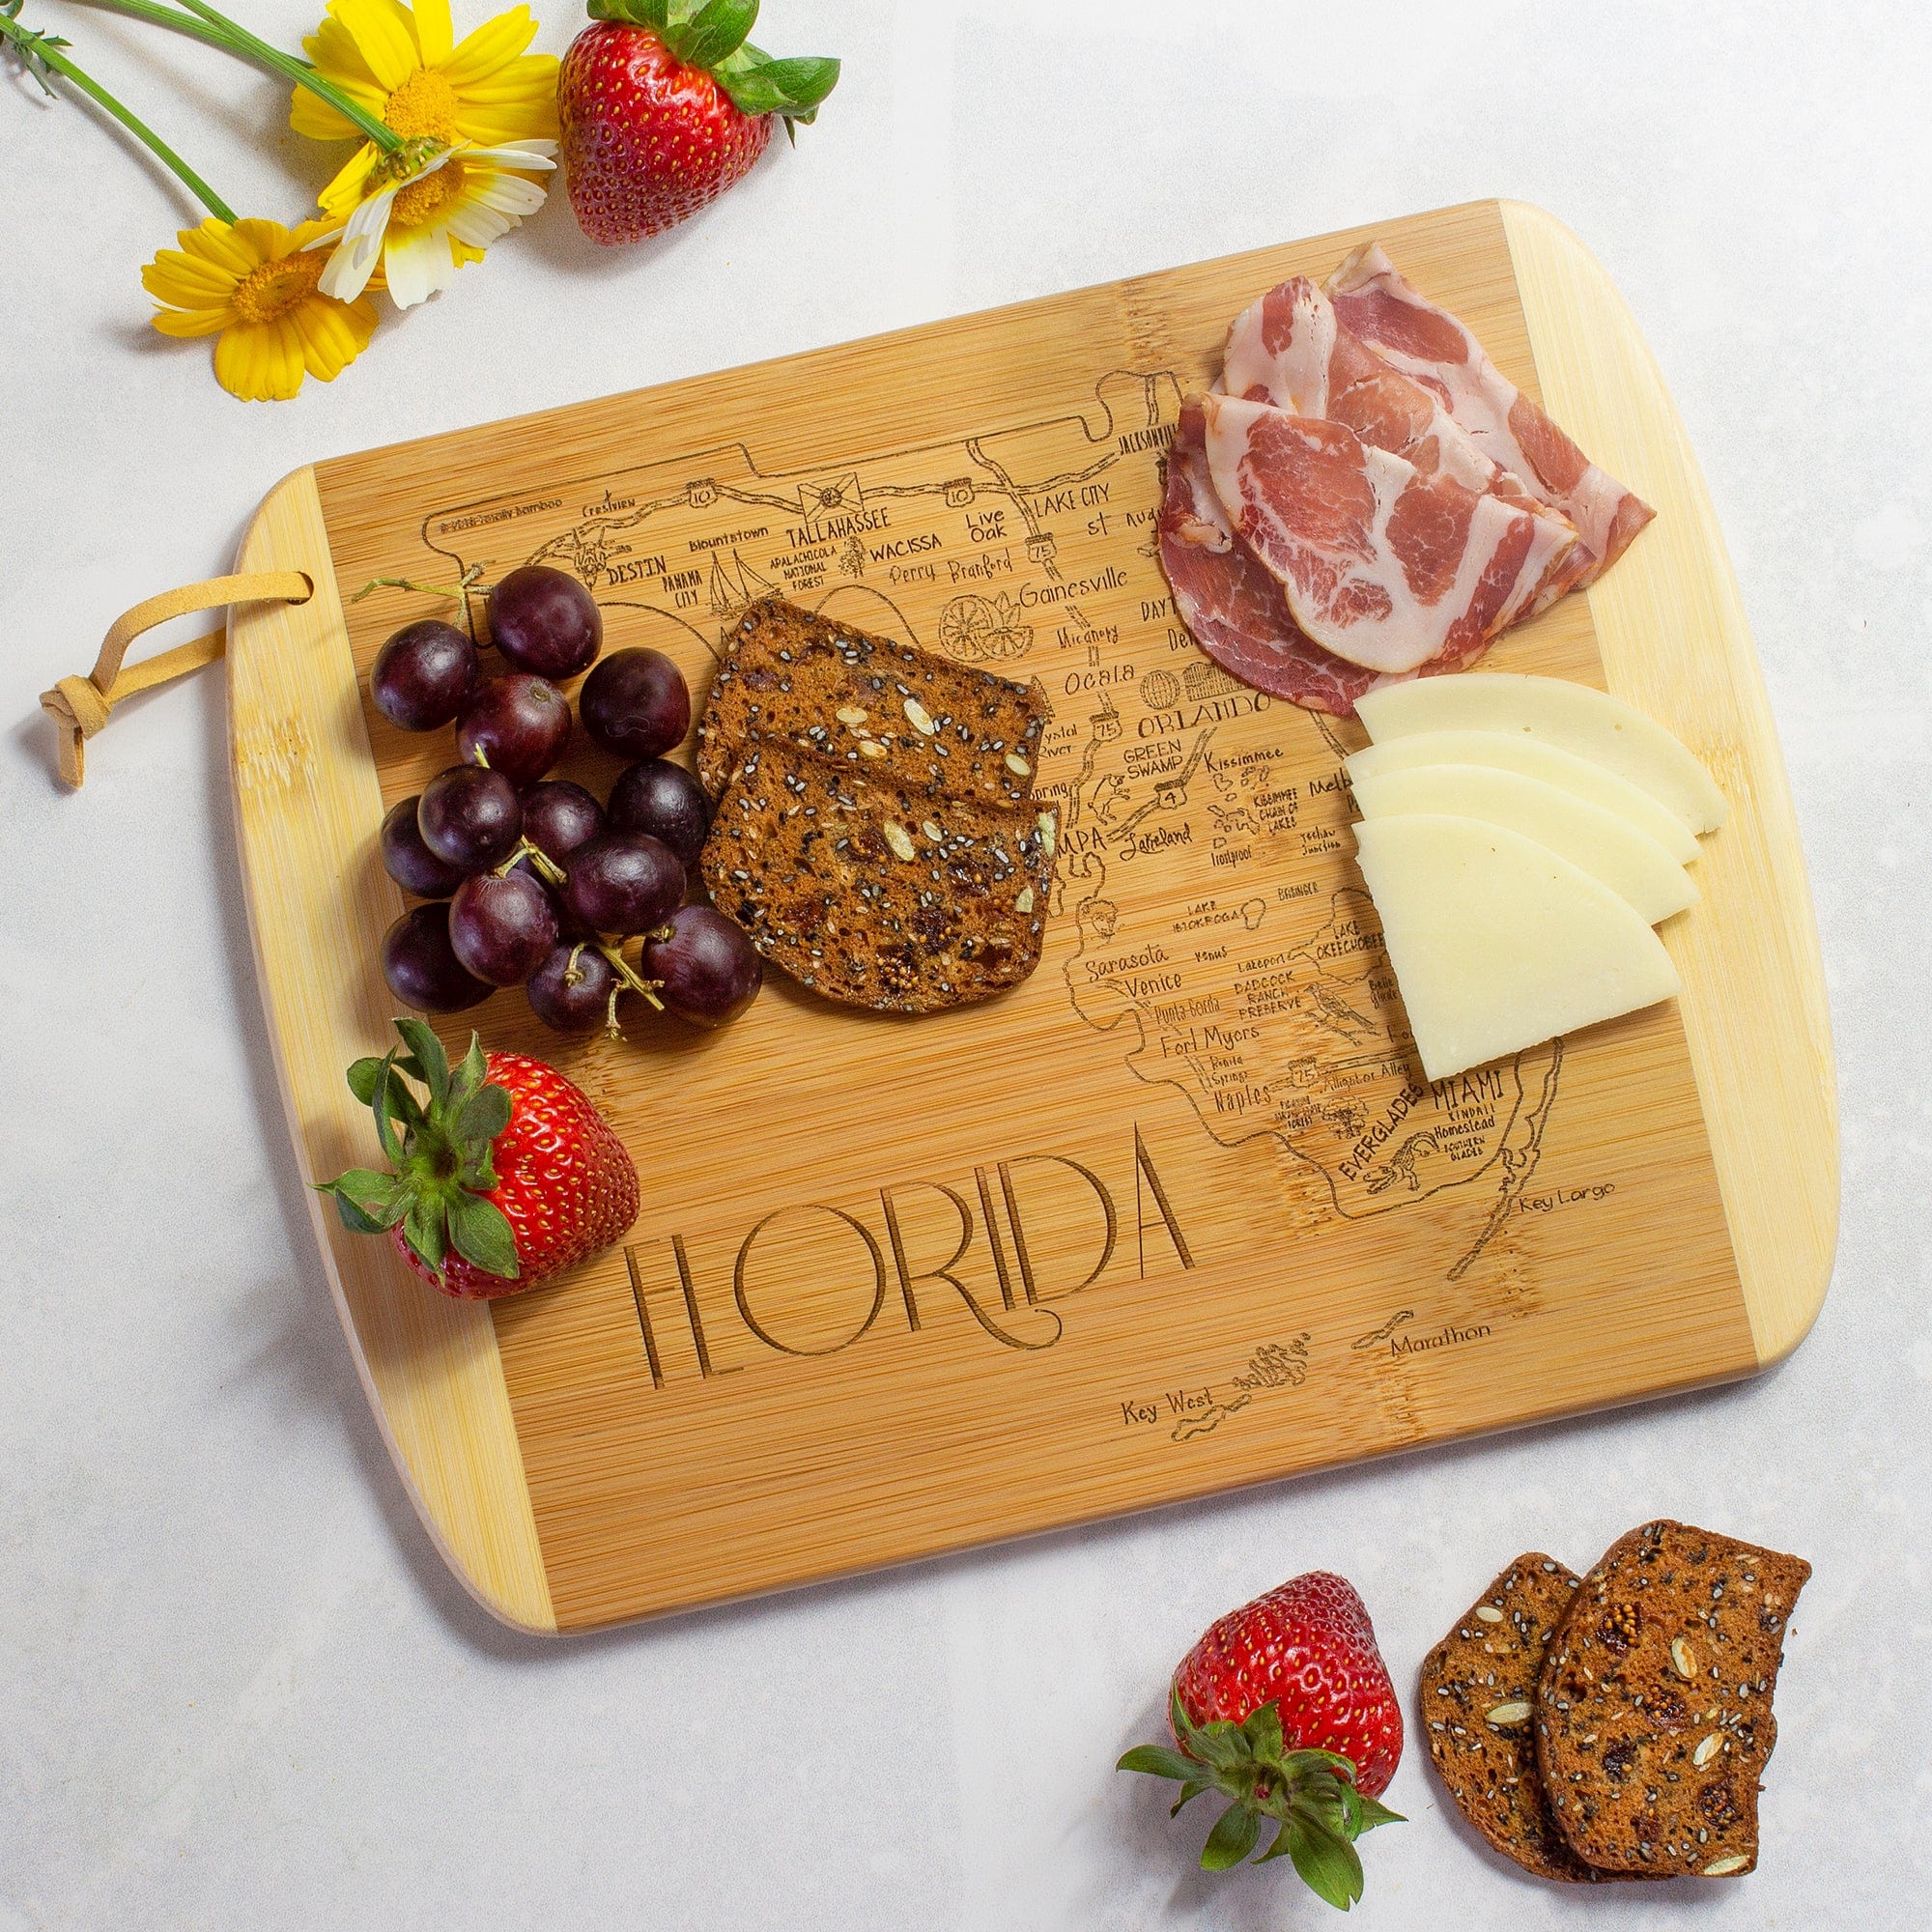 Totally Bamboo A Slice of Life Florida Serving and Cutting Board, 11" x 8-3/4"